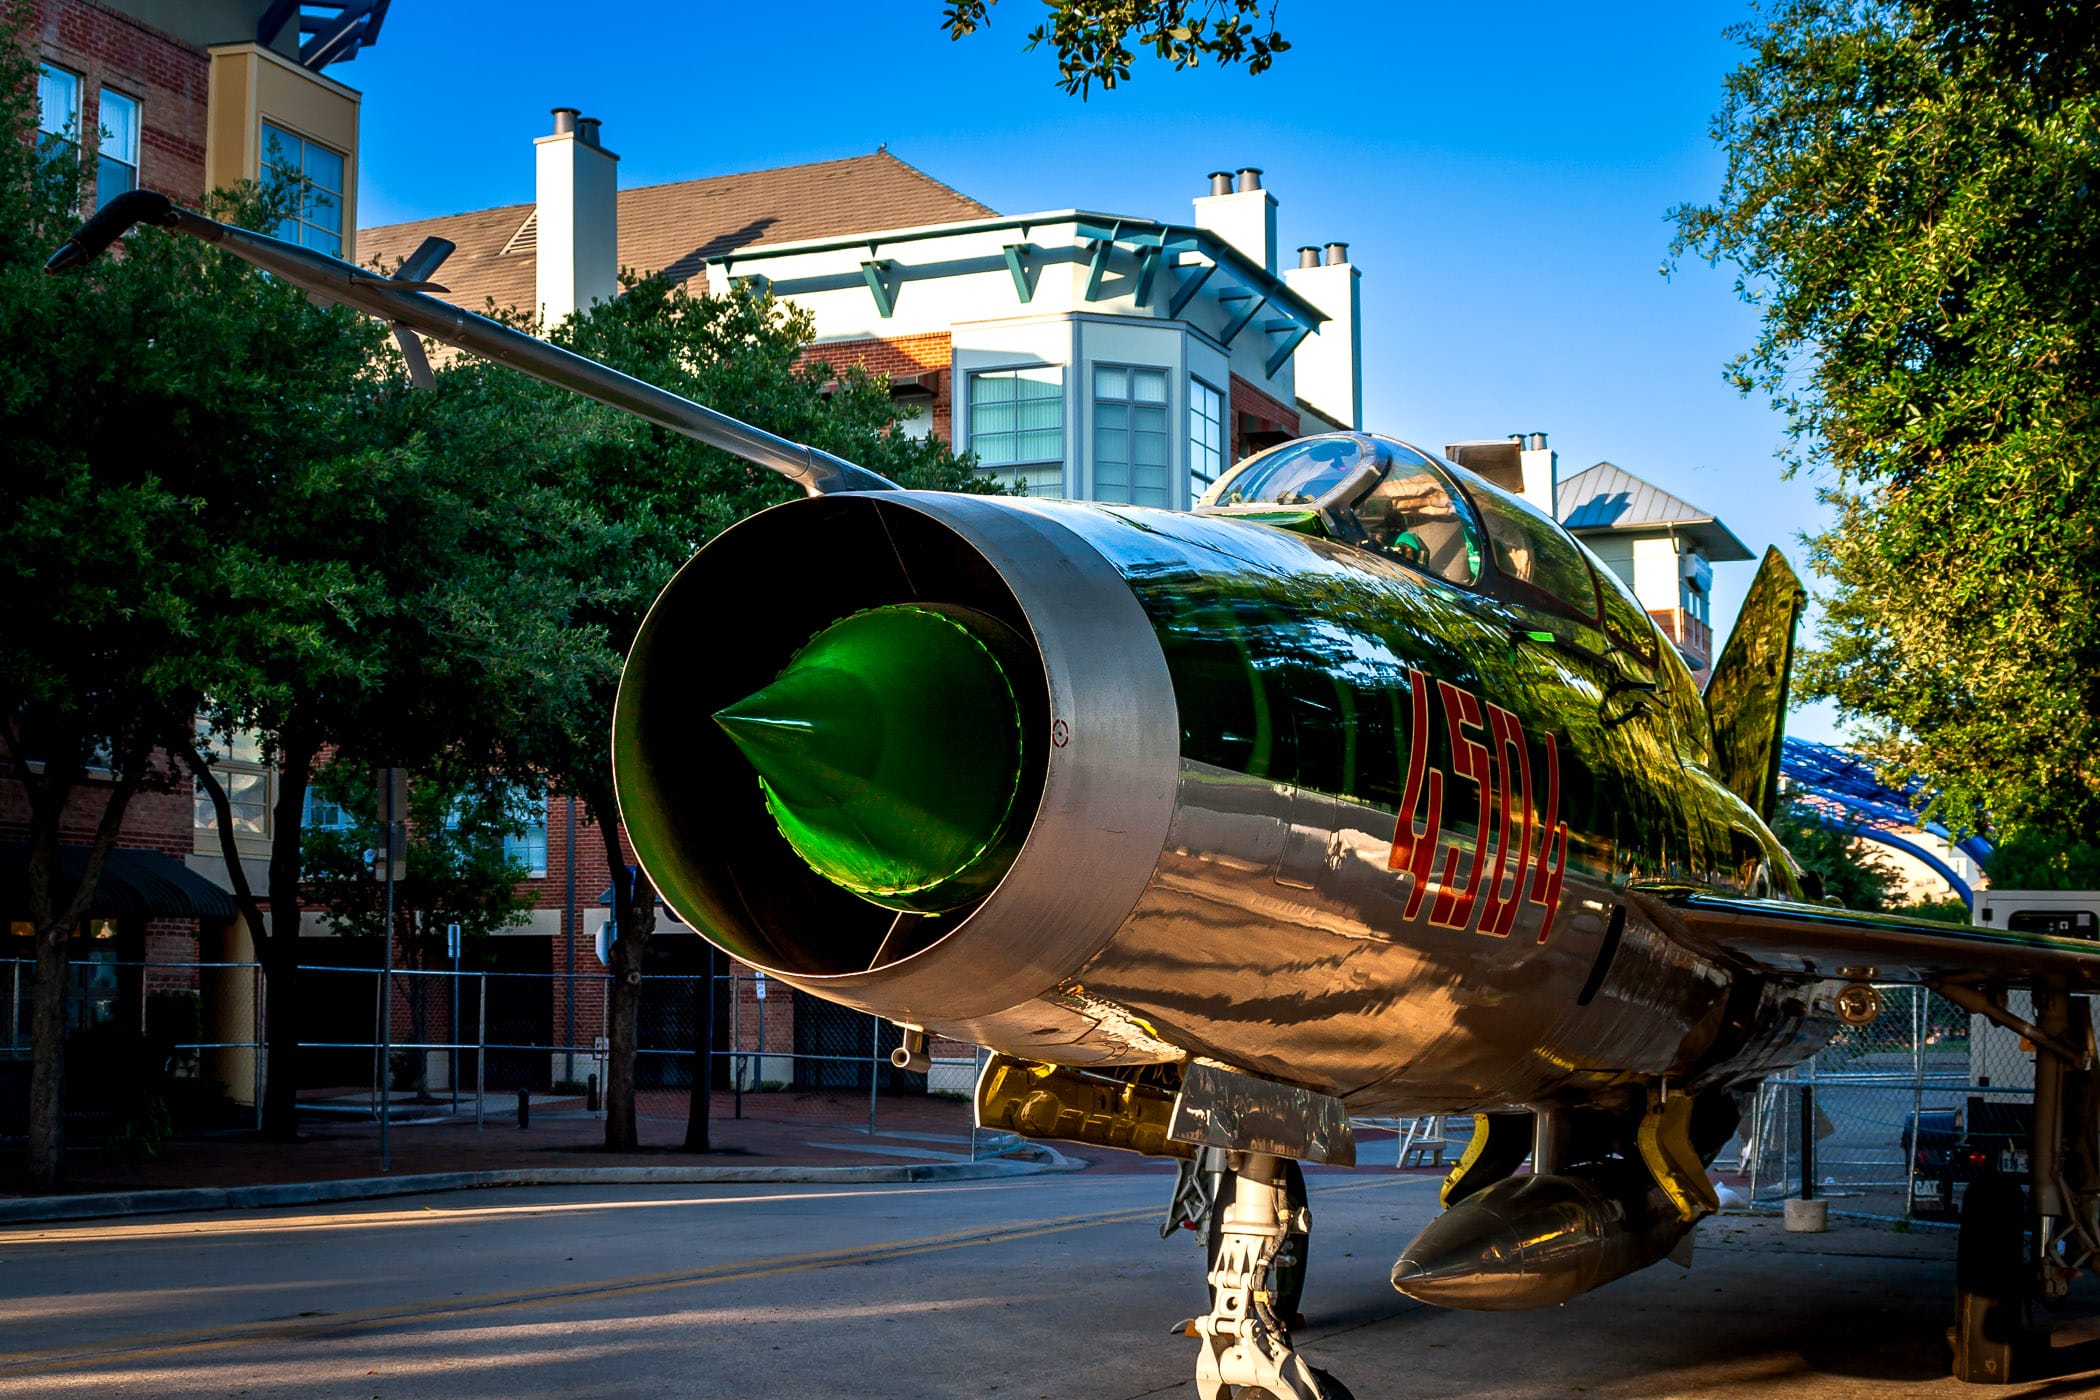 A Yugoslav variant of the MiG-21 "Fishbed"—the MiG-21U-400 "Mongol"—belonging to Addison, Texas' Cavanaugh Flight Museum sits in the street for Taste Addison.